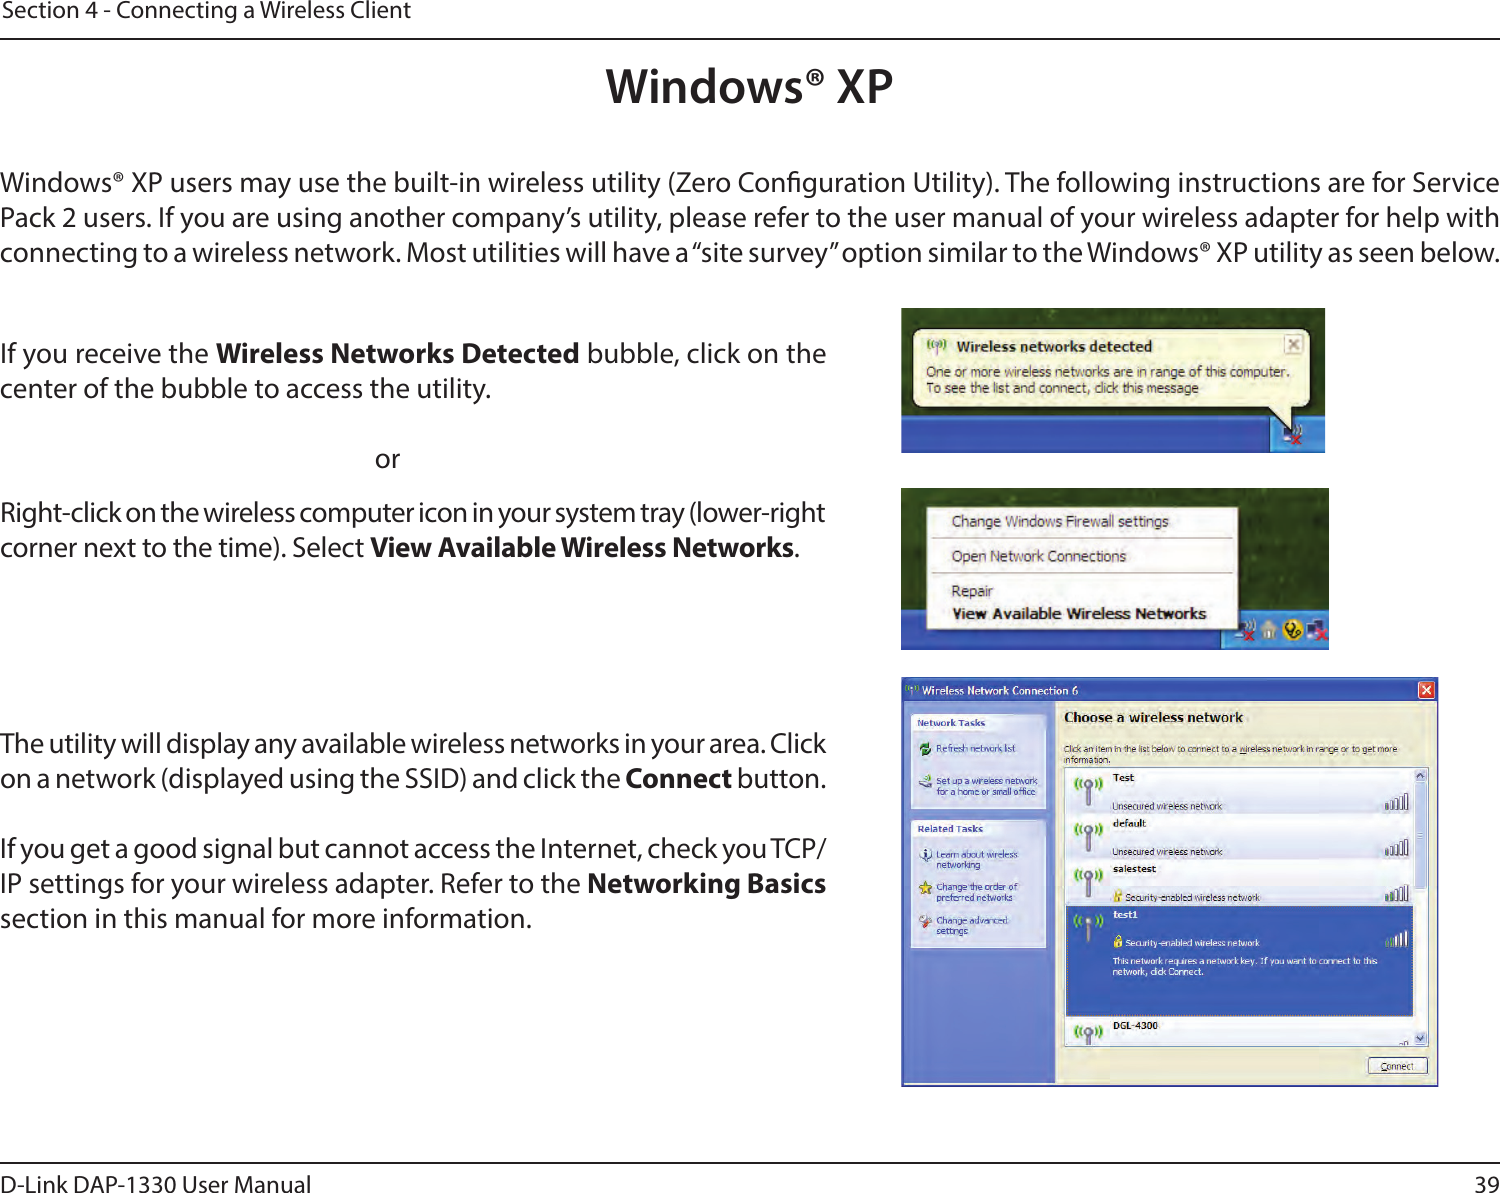 39D-Link DAP-1330 User ManualSection 4 - Connecting a Wireless ClientWindows® XPWindows® XP users may use the built-in wireless utility (Zero Conguration Utility). The following instructions are for Service Pack 2 users. If you are using another company’s utility, please refer to the user manual of your wireless adapter for help with connecting to a wireless network. Most utilities will have a “site survey” option similar to the Windows® XP utility as seen below.Right-click on the wireless computer icon in your system tray (lower-right corner next to the time). Select View Available Wireless Networks.If you receive the Wireless Networks Detected bubble, click on the center of the bubble to access the utility.     orThe utility will display any available wireless networks in your area. Click on a network (displayed using the SSID) and click the Connect button.If you get a good signal but cannot access the Internet, check you TCP/IP settings for your wireless adapter. Refer to the Networking Basics section in this manual for more information.